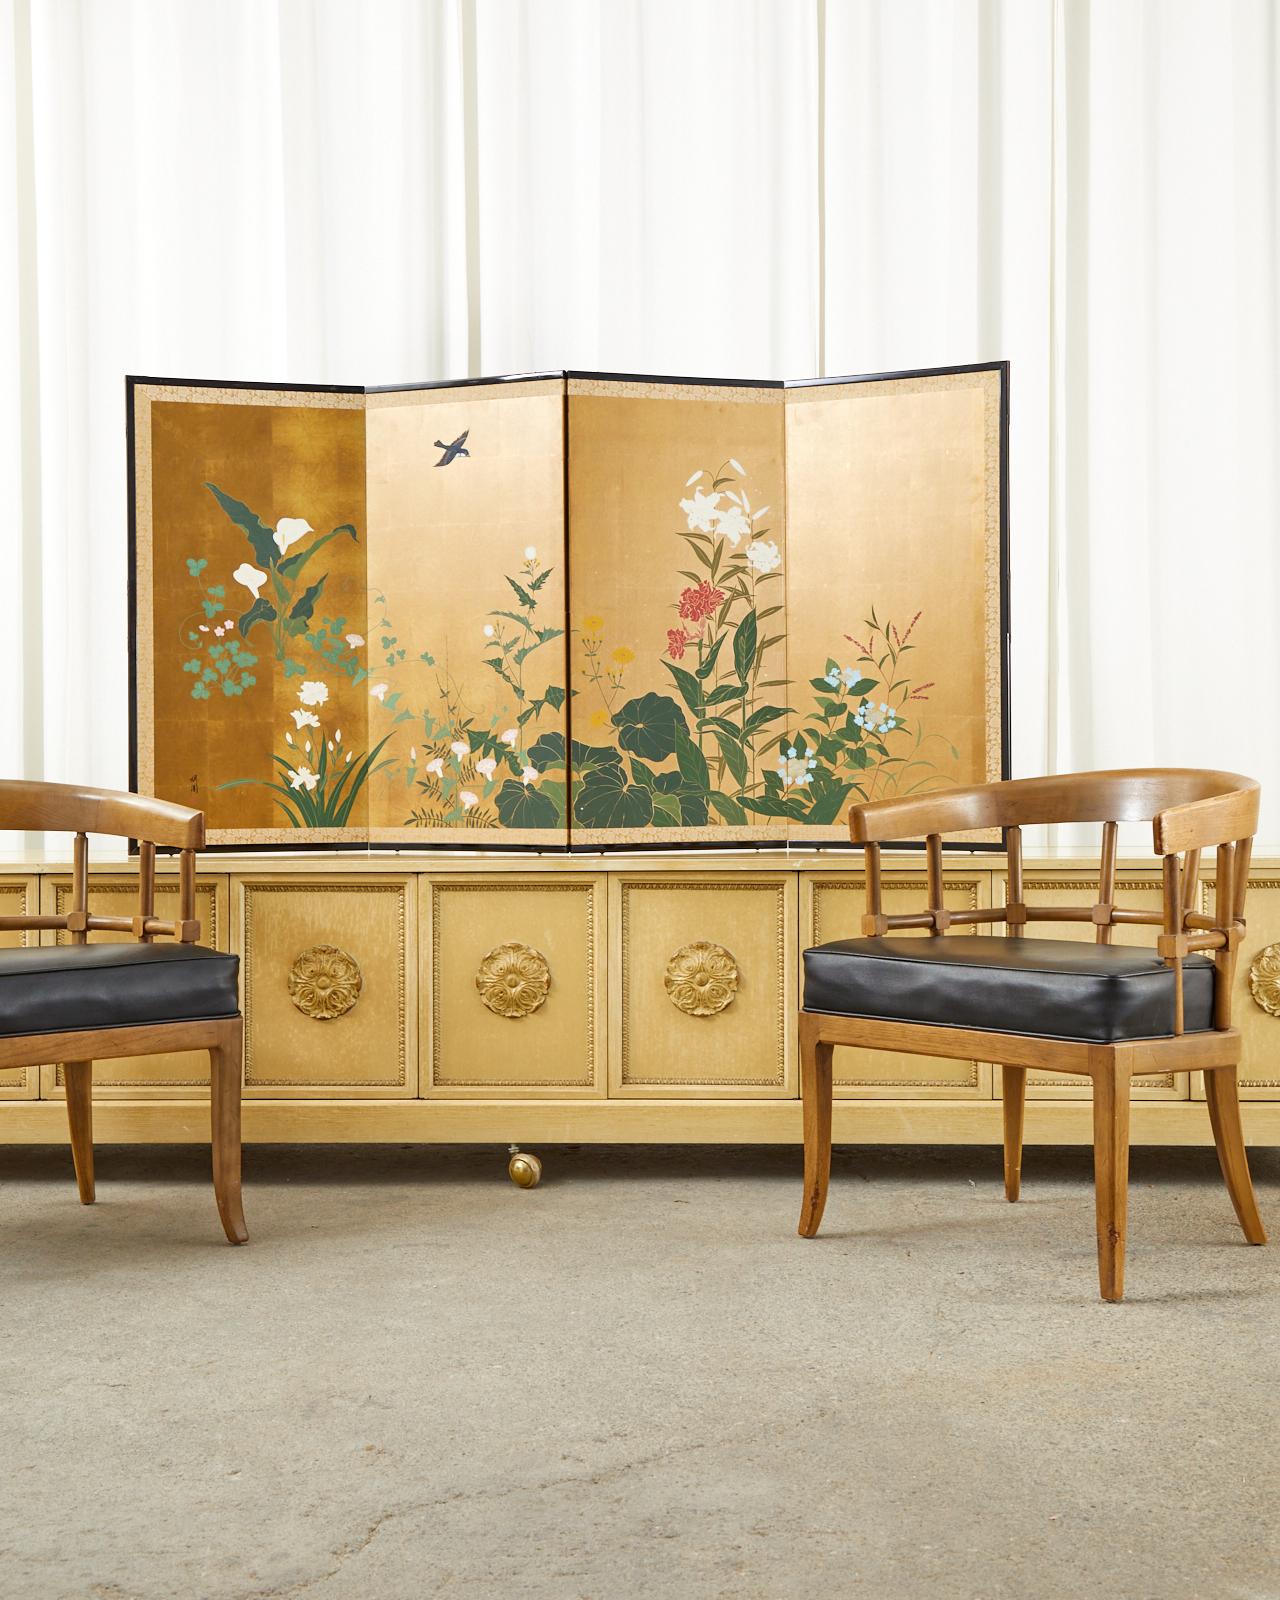 Charming Japanese Showa period four-panel byobu screen depicting a songbird in flight above blossoming spring flowers. Ink and natural color pigments on a gilt square background. Signed with a seal on left bottom side. Set in an ebonized wood frame